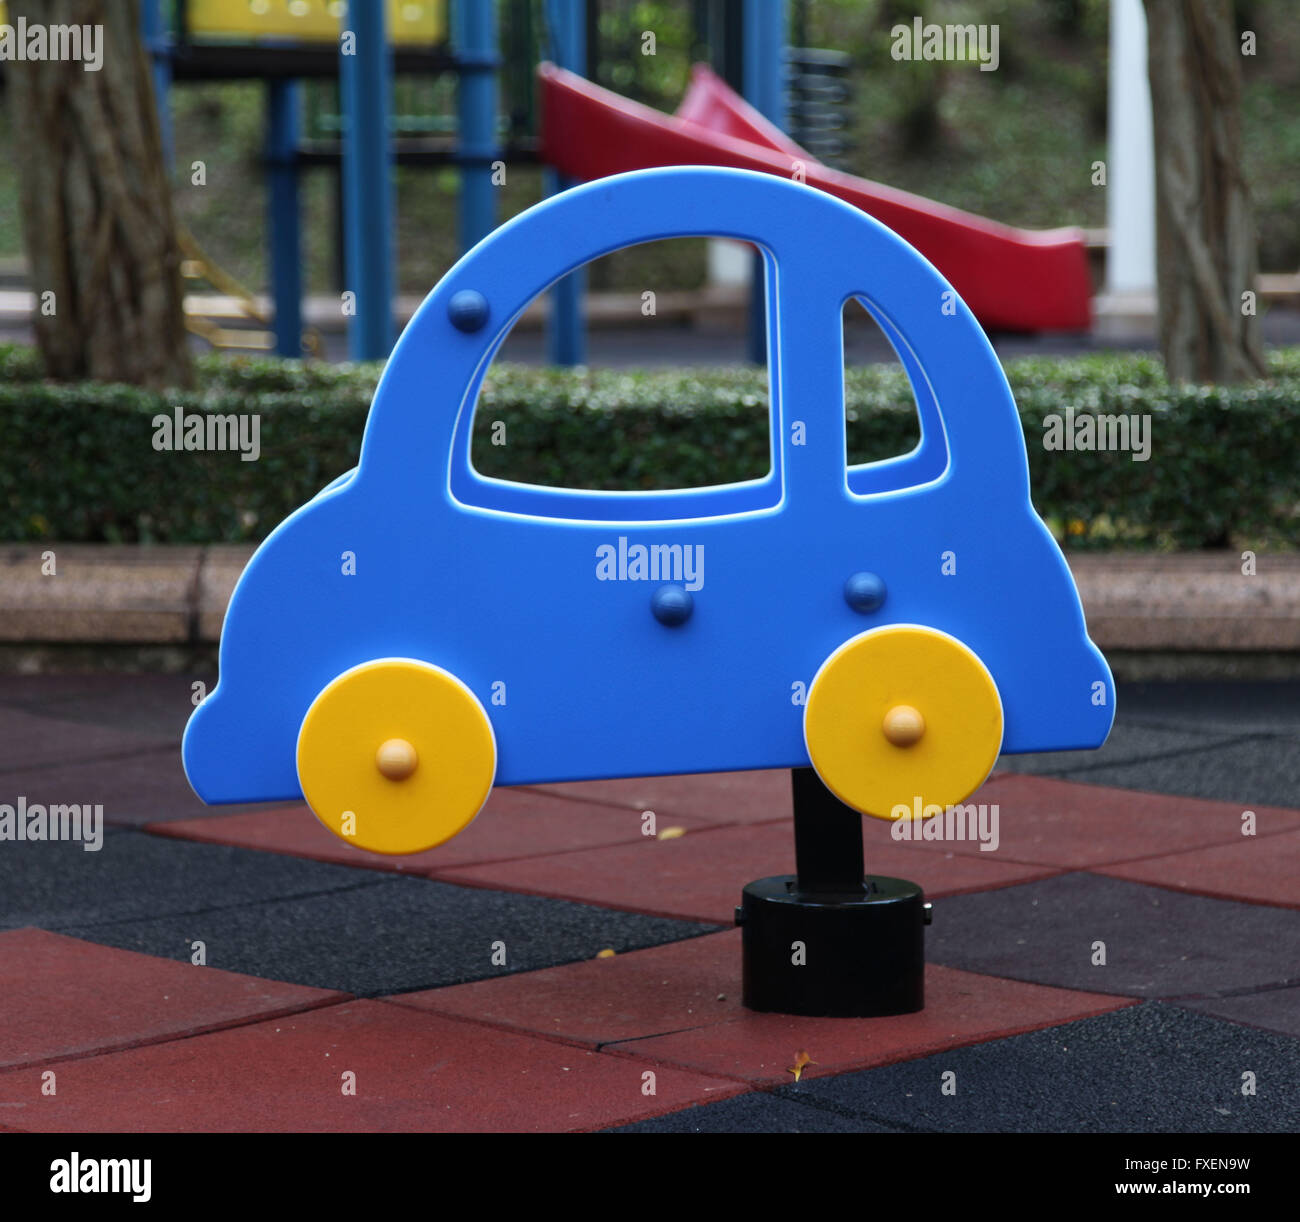 It's a photo of a small blue car swing for kids to play n a kid's playground. Stock Photo